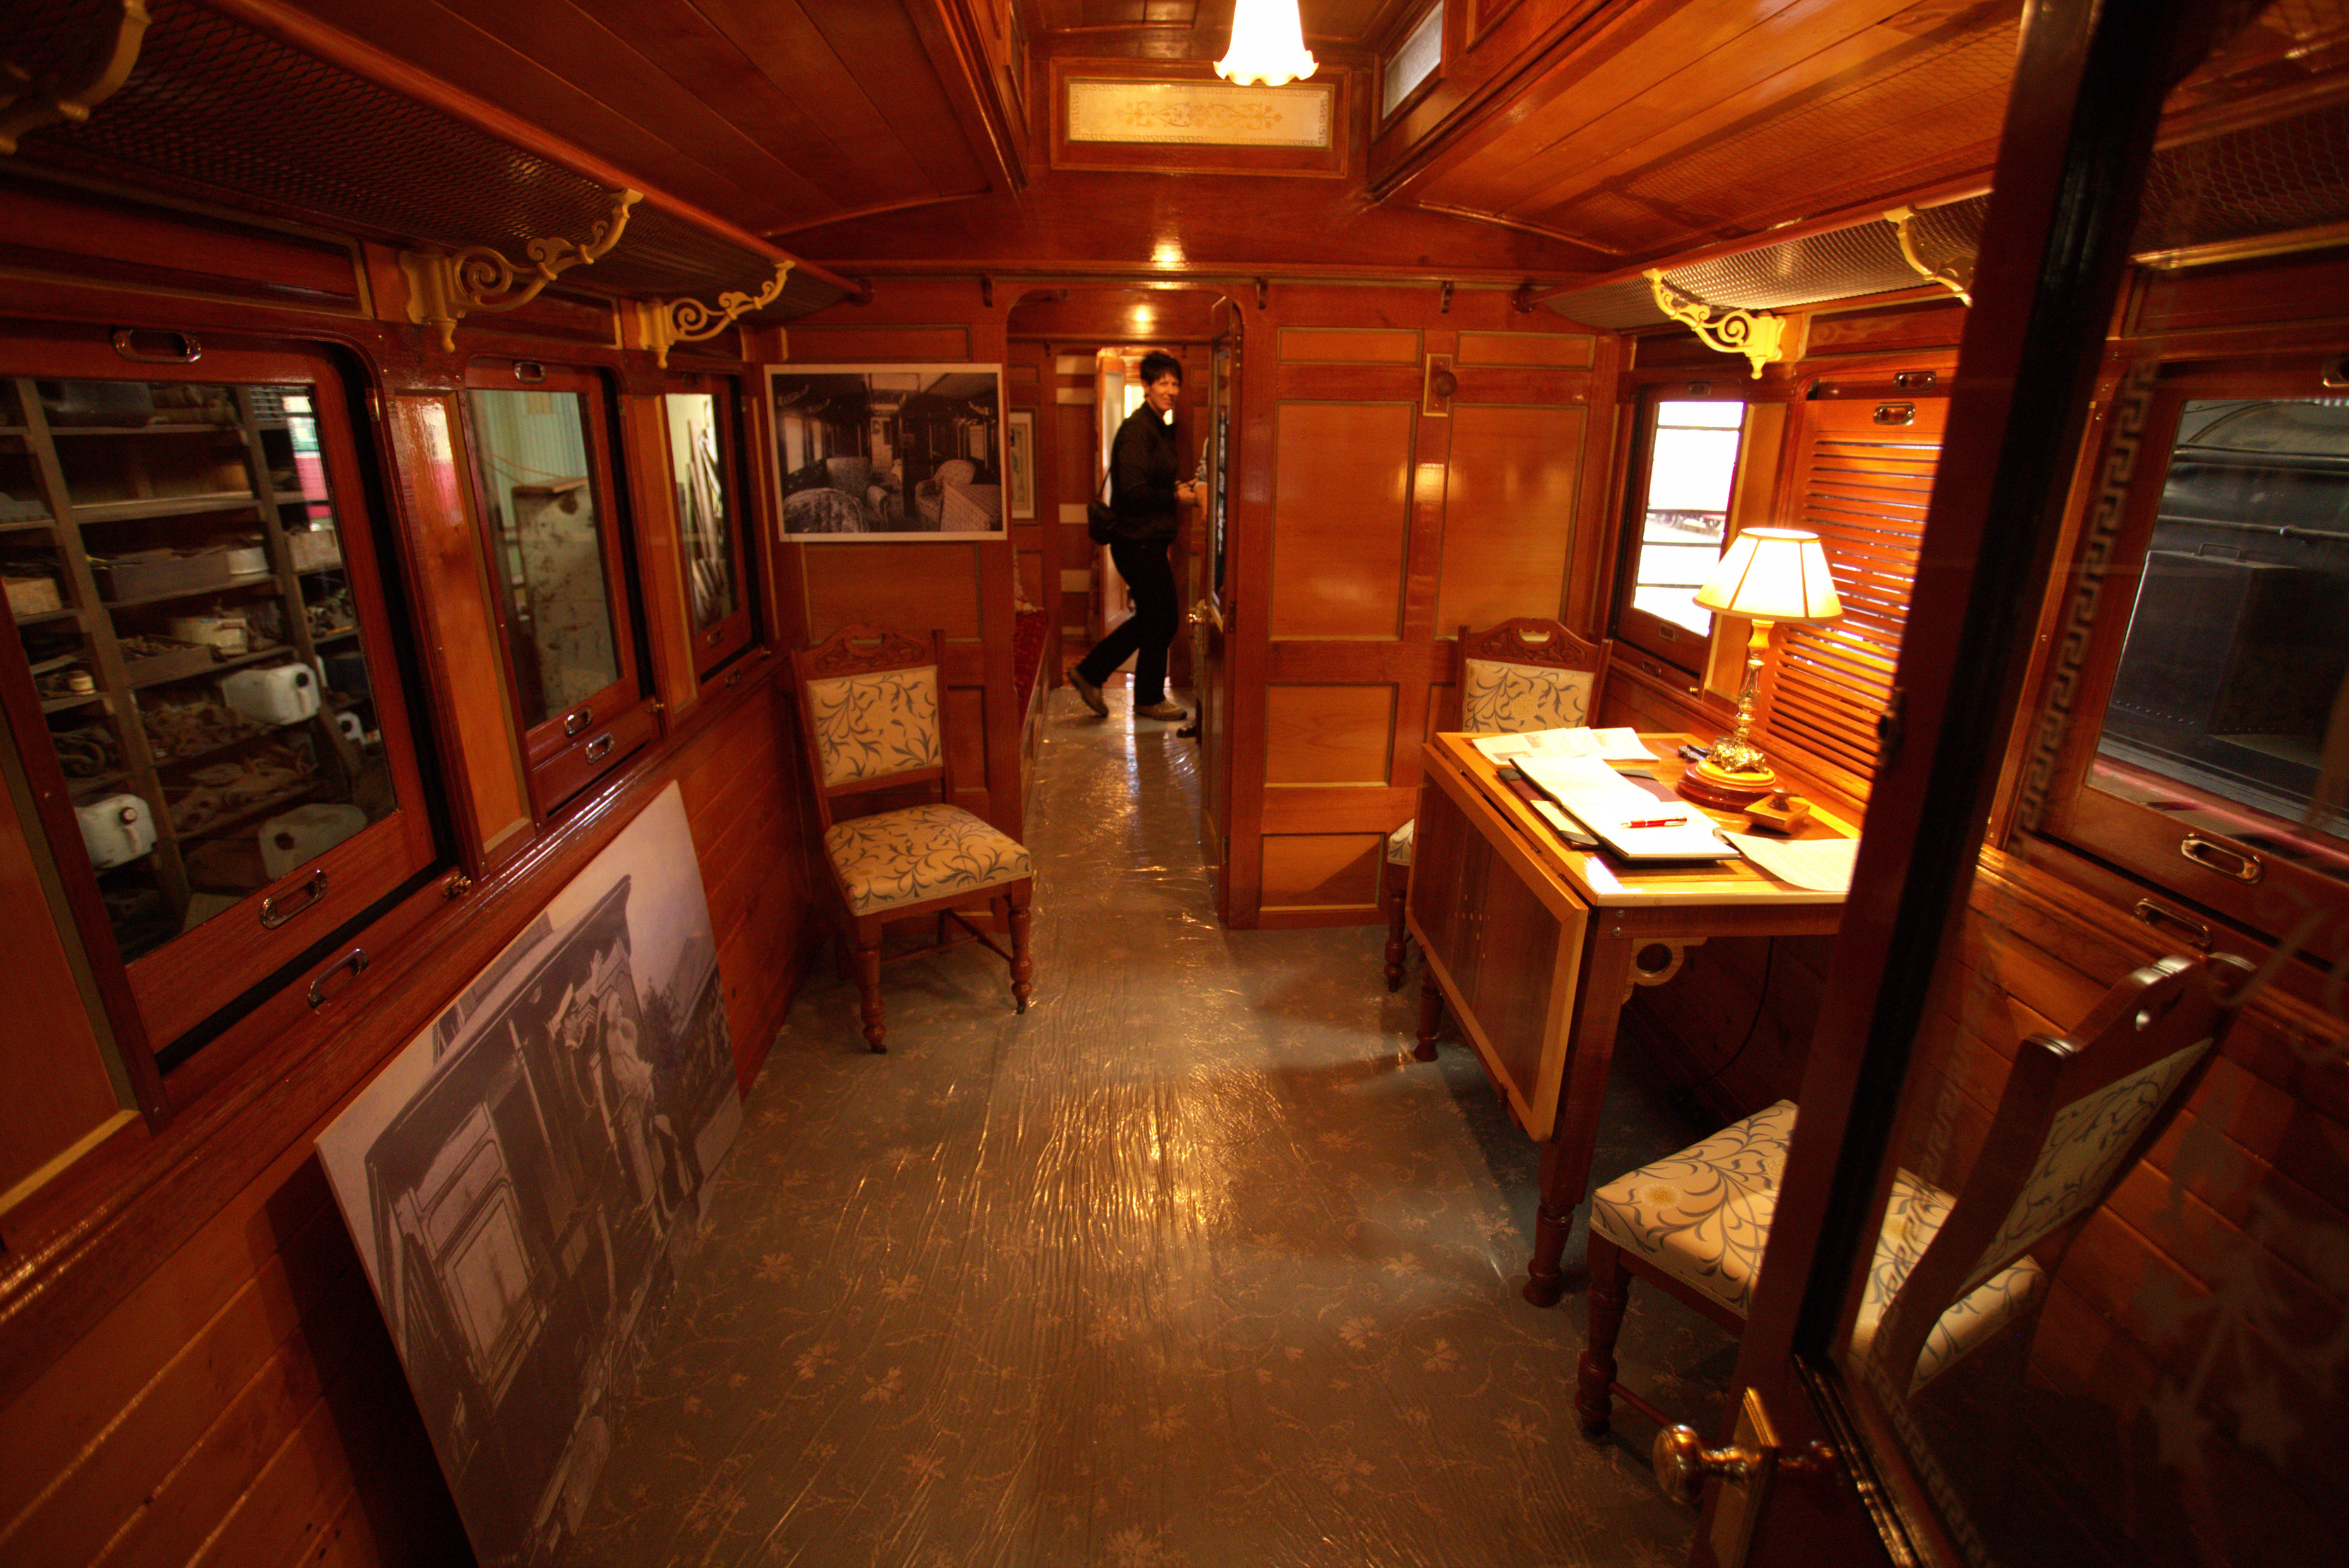 Image inside a carriage of a vintage train. With a dark wooden interior filled with vintage furniture and lighting.